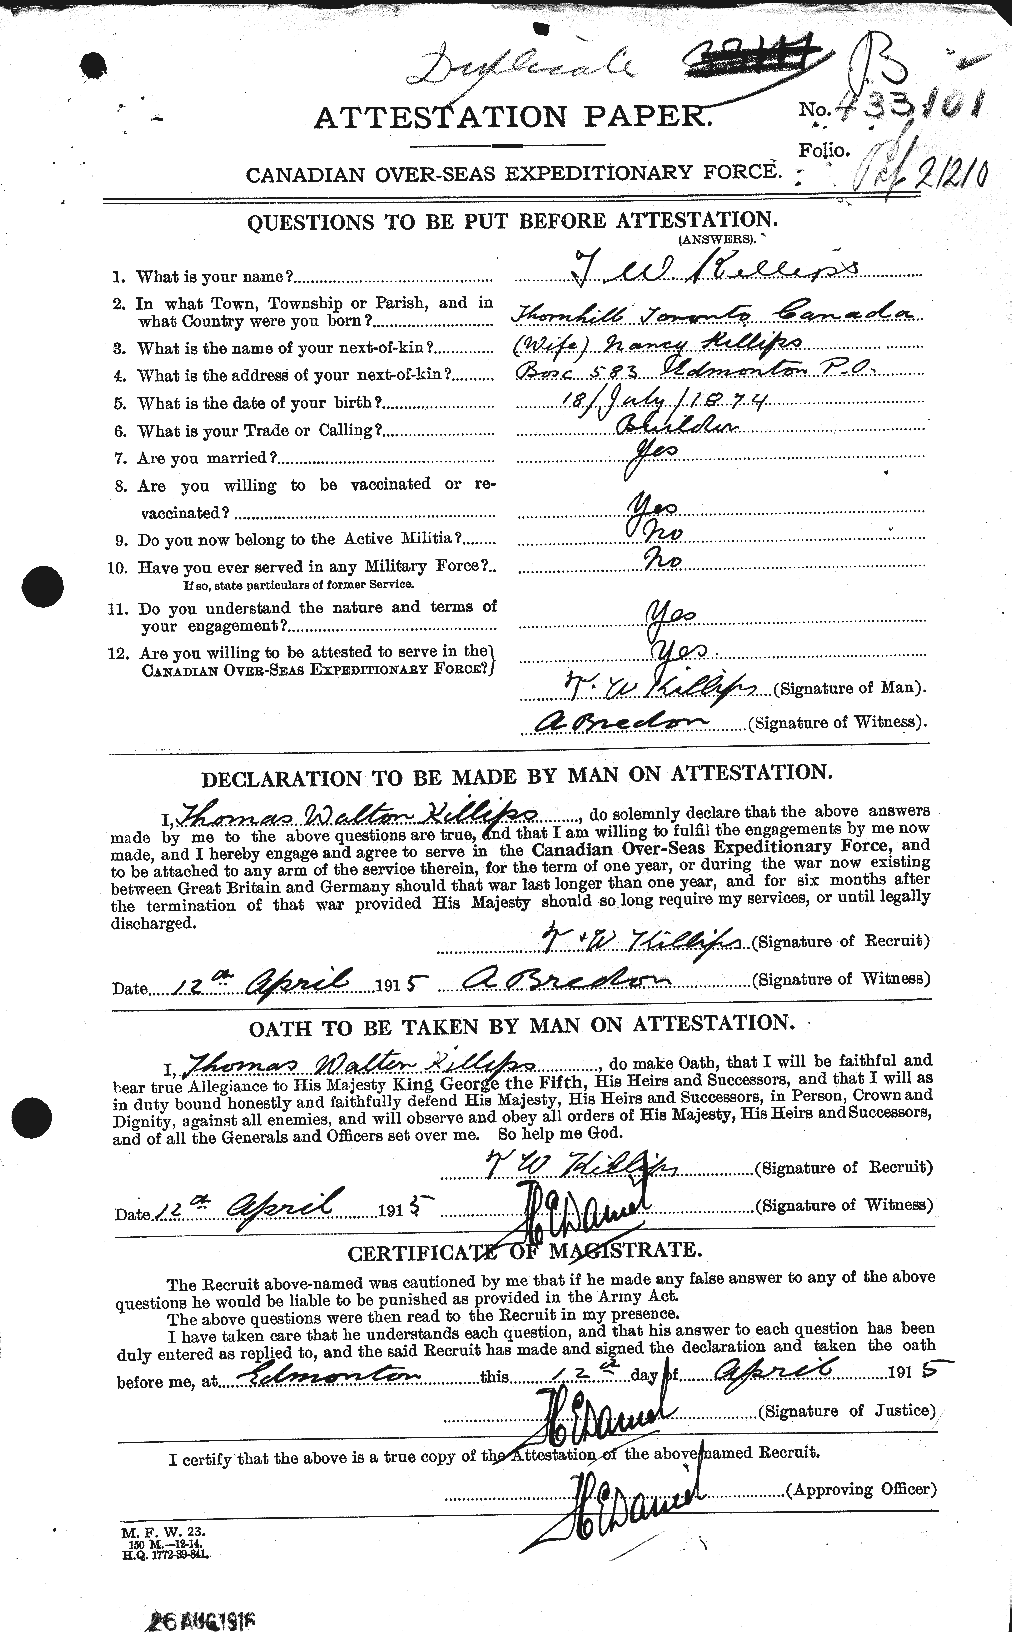 Personnel Records of the First World War - CEF 434097a